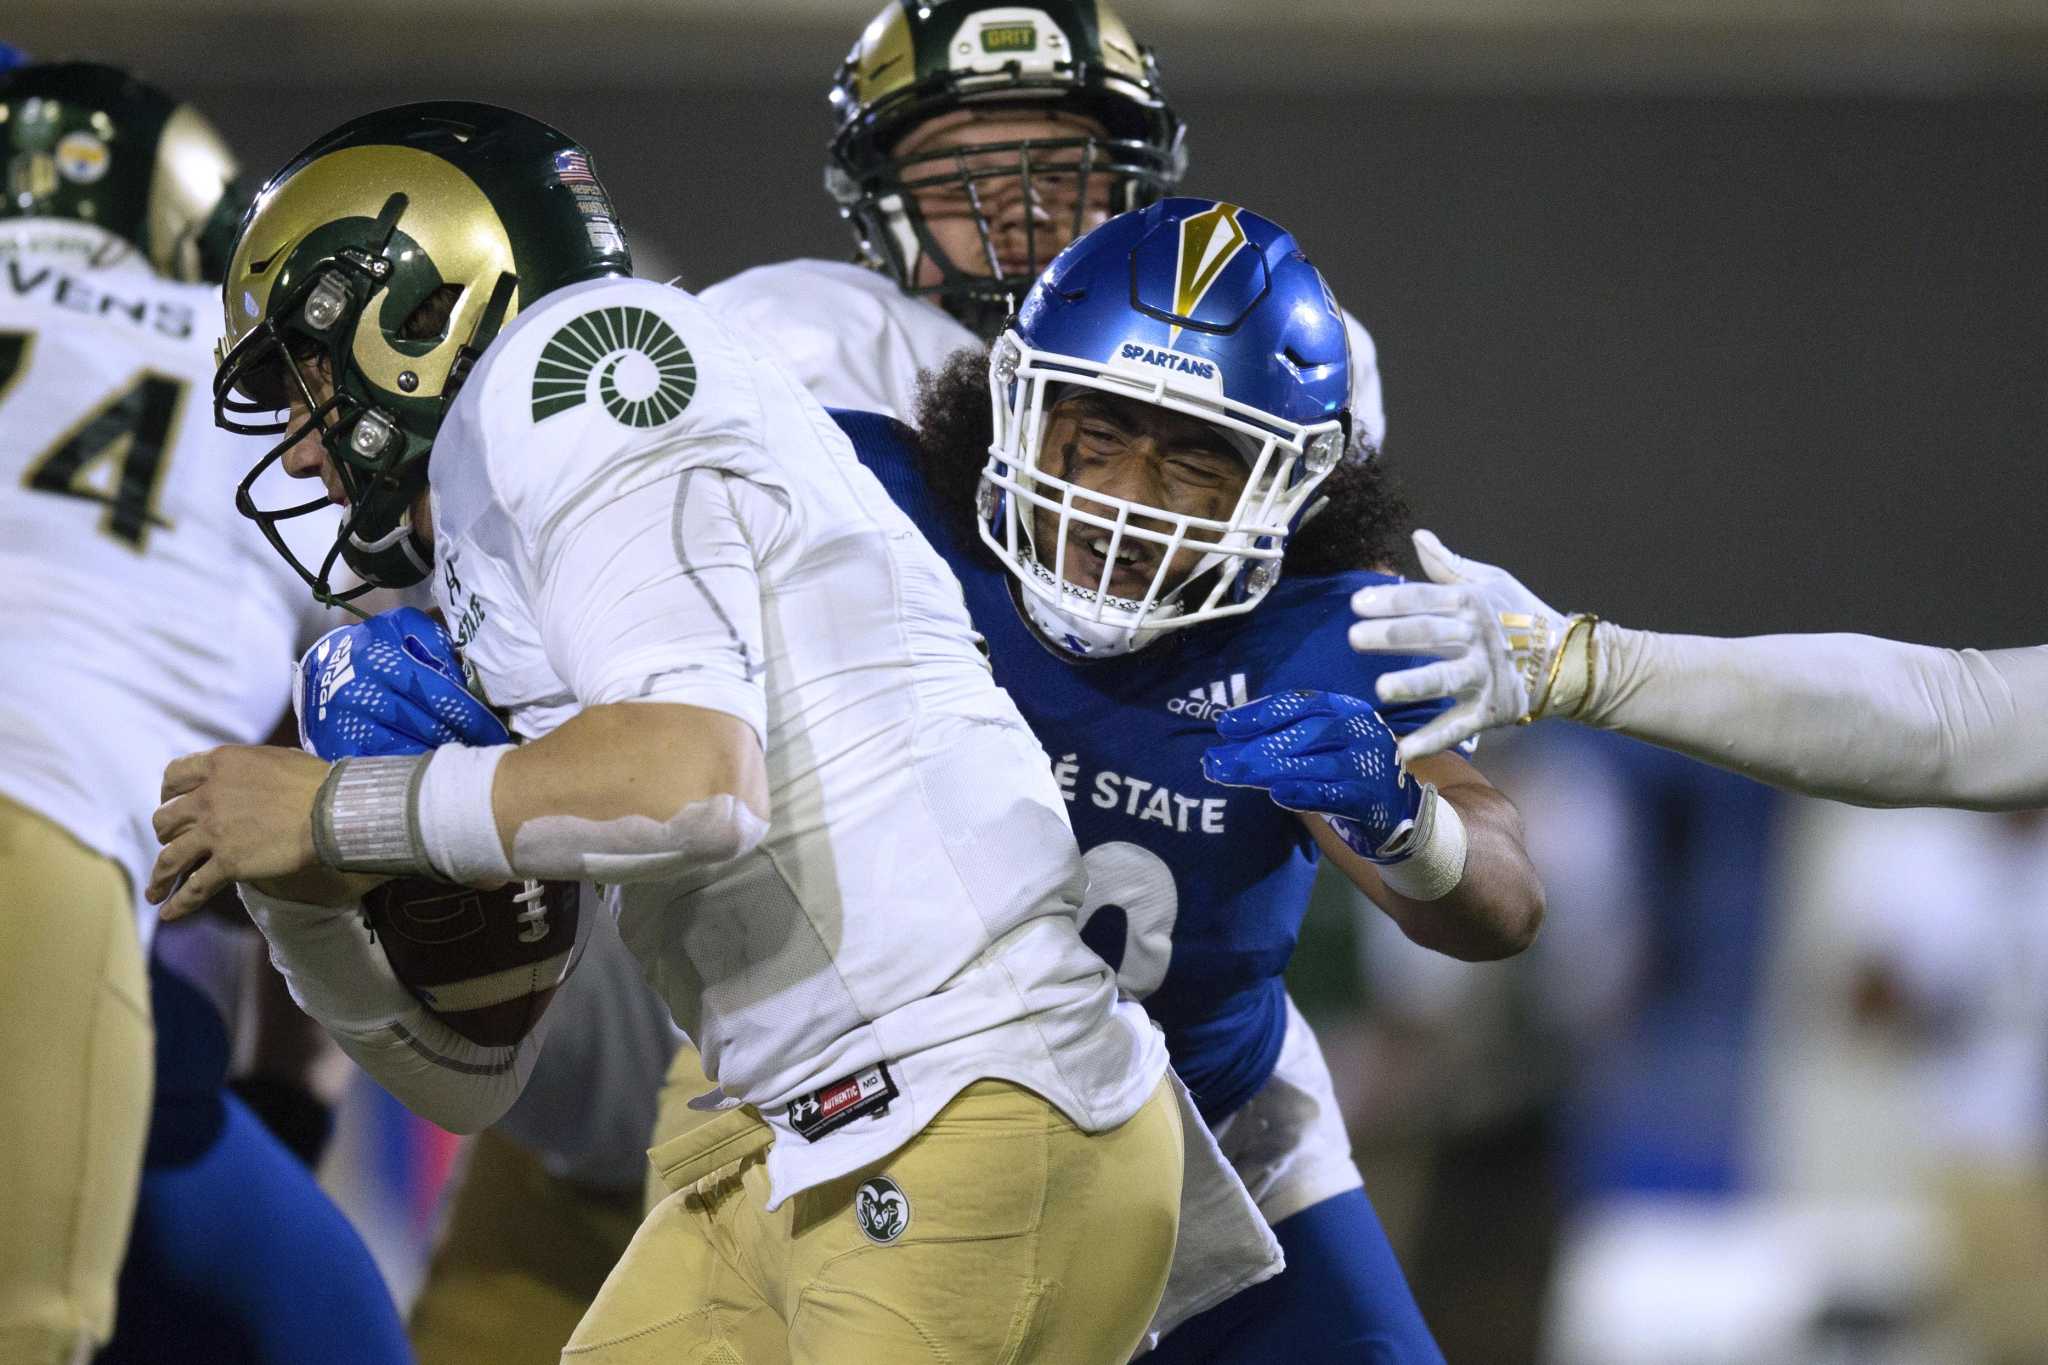 San Jose State’s Viliami Fehoko named MWC’s Defensive Player of Year